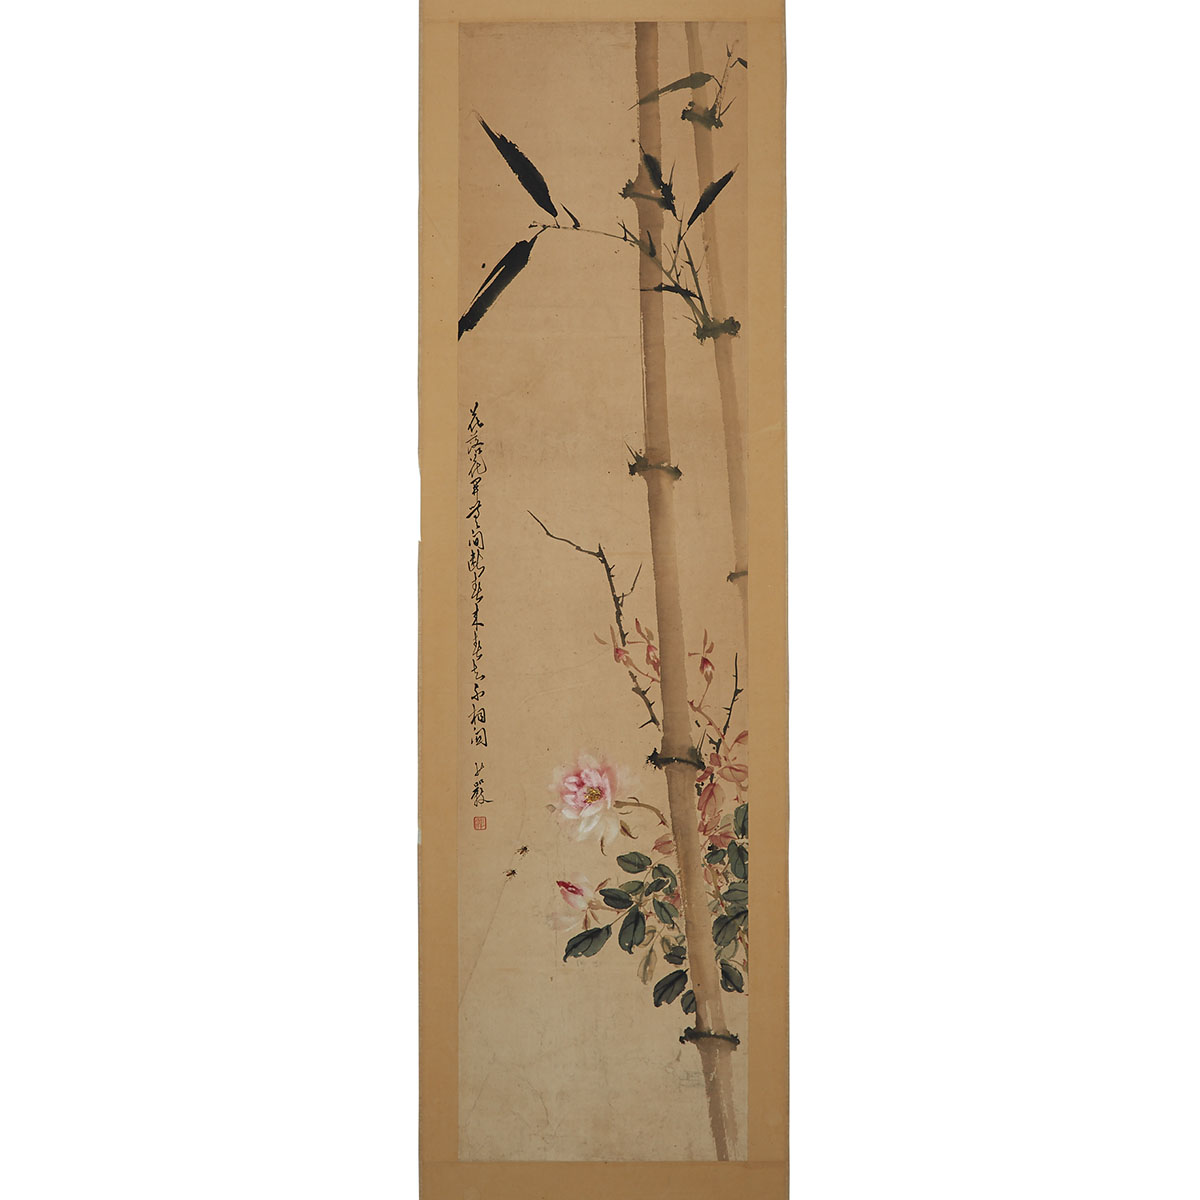 Ou Shaoyan 歐少儼, Bamboo and Flowers